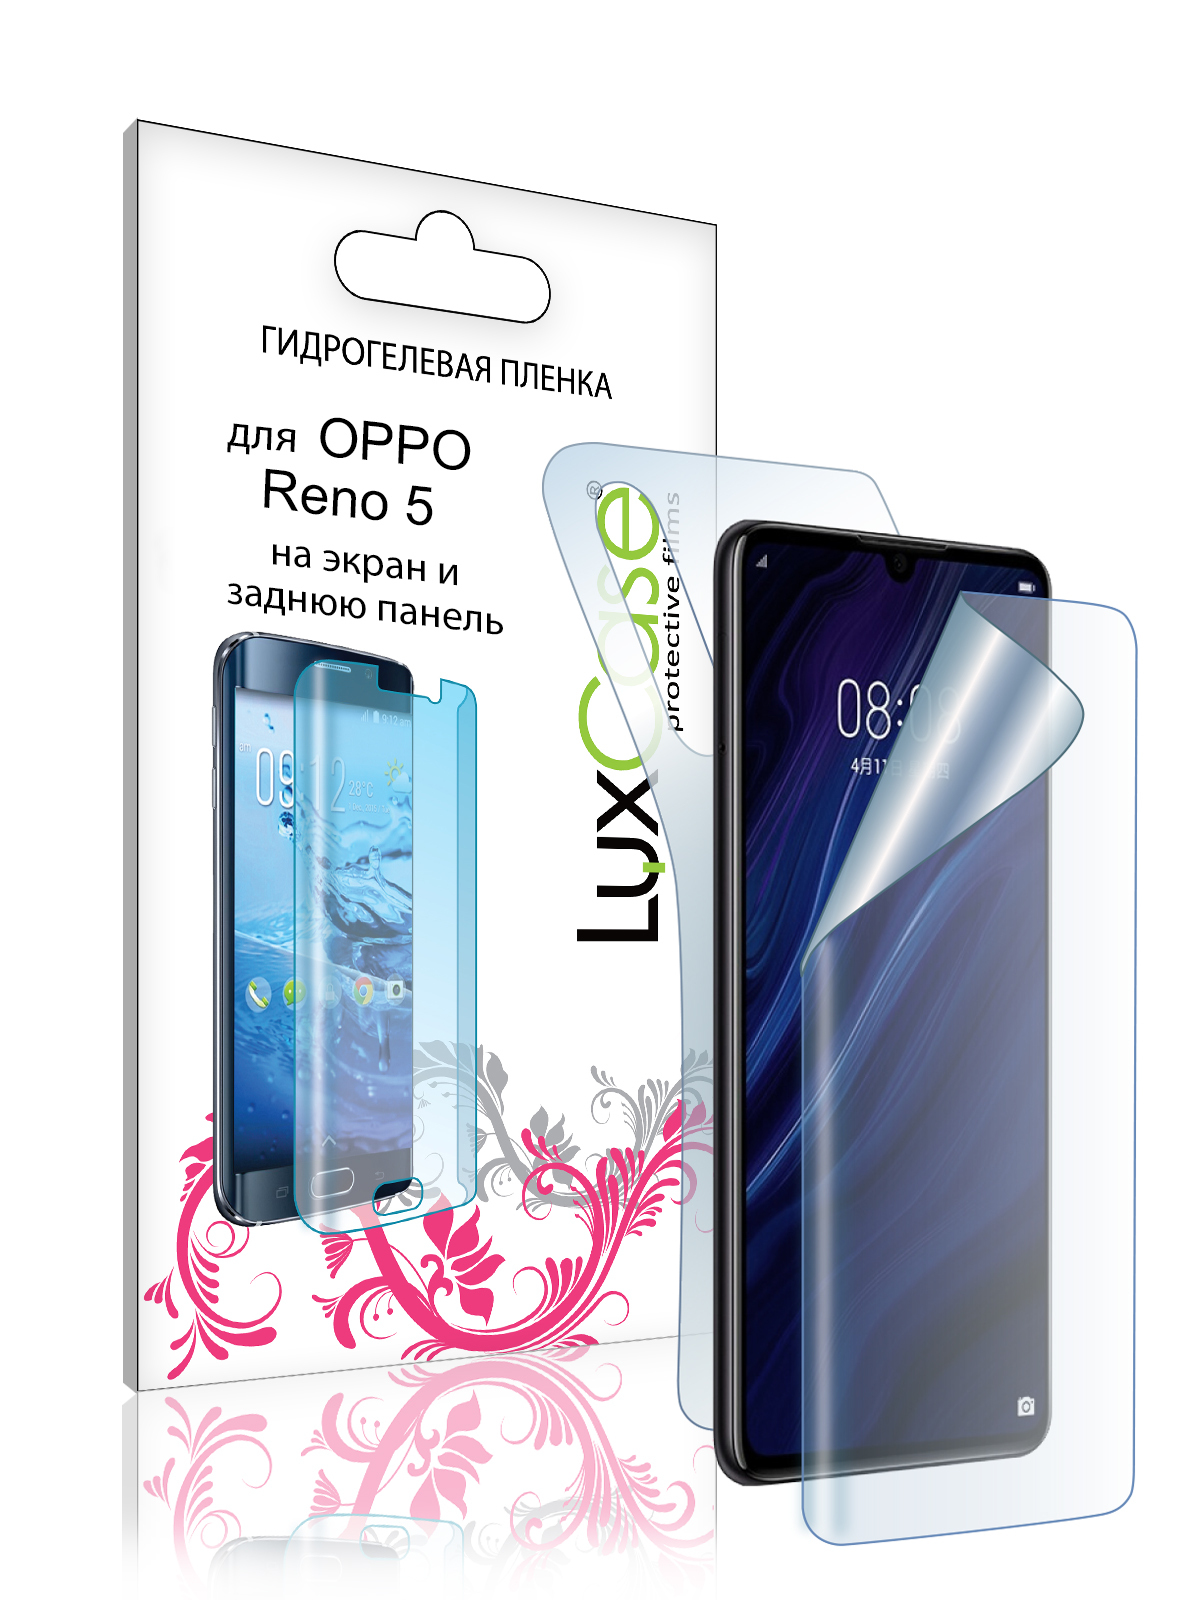 Гидрогелевая пленка LuxCase для Oppo Reno 5 0.14mm Front and Back Transparent 86977 гидрогелевая пленка luxcase для google pixel 5 0 14mm front and back transparent 86726